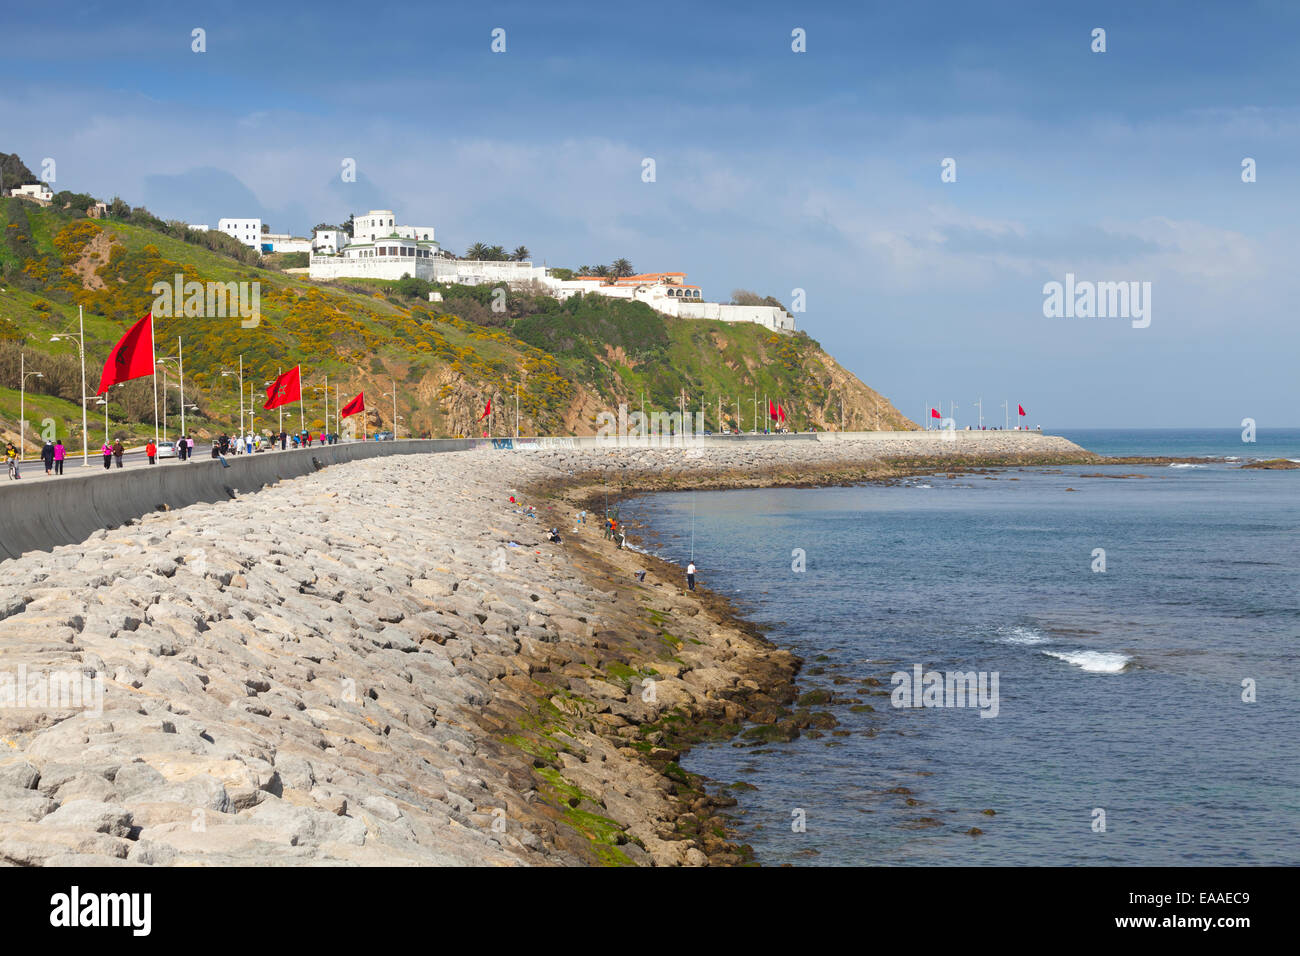 Tangier, Morocco - March 22, 2014: Coastal street panorama with flags, Tangier, Morocco Stock Photo